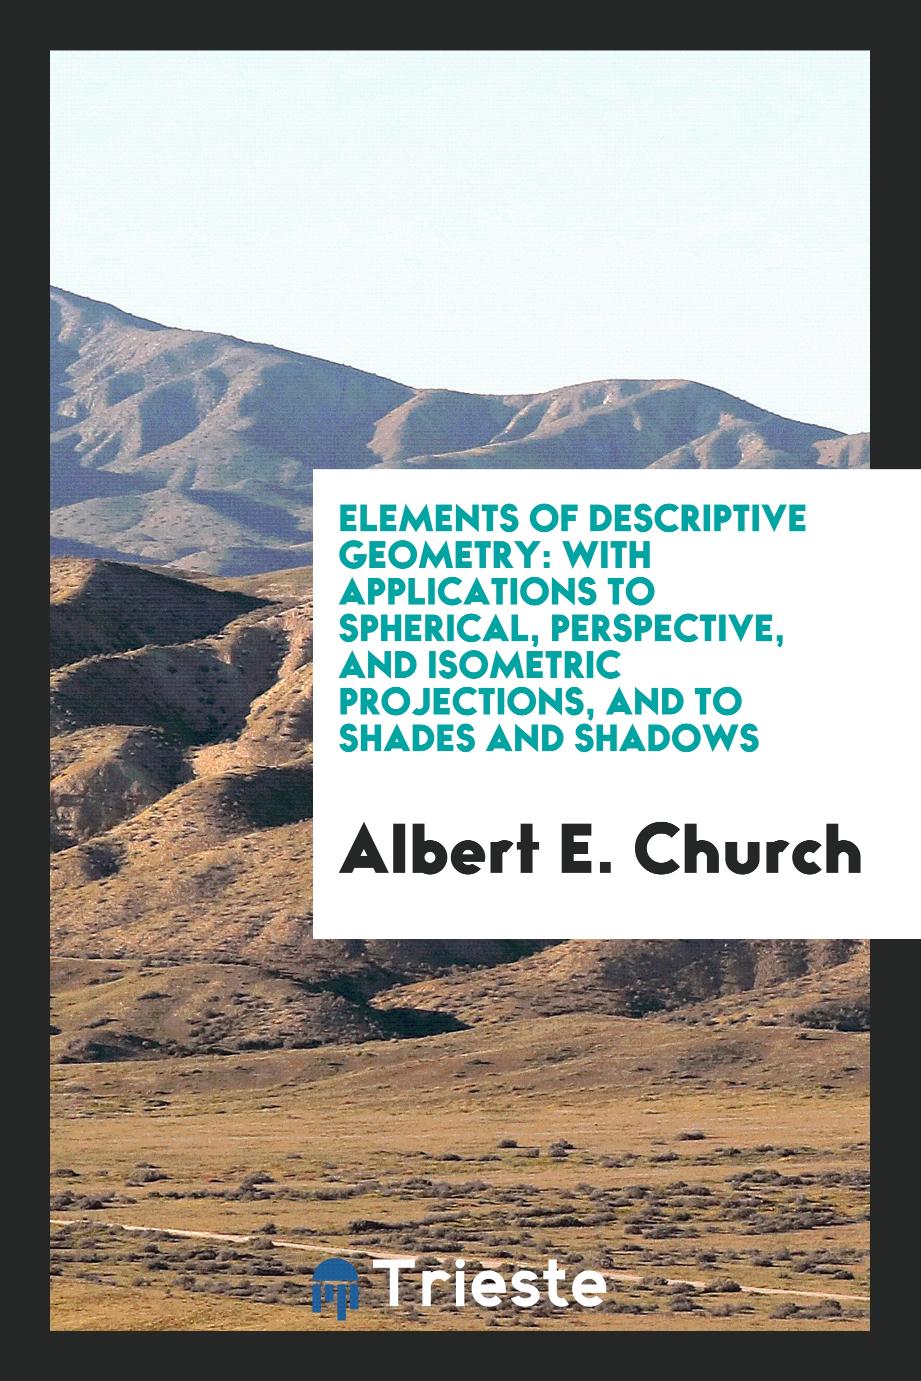 Elements of Descriptive Geometry: With Applications to Spherical, Perspective, and Isometric Projections, and to Shades and Shadows